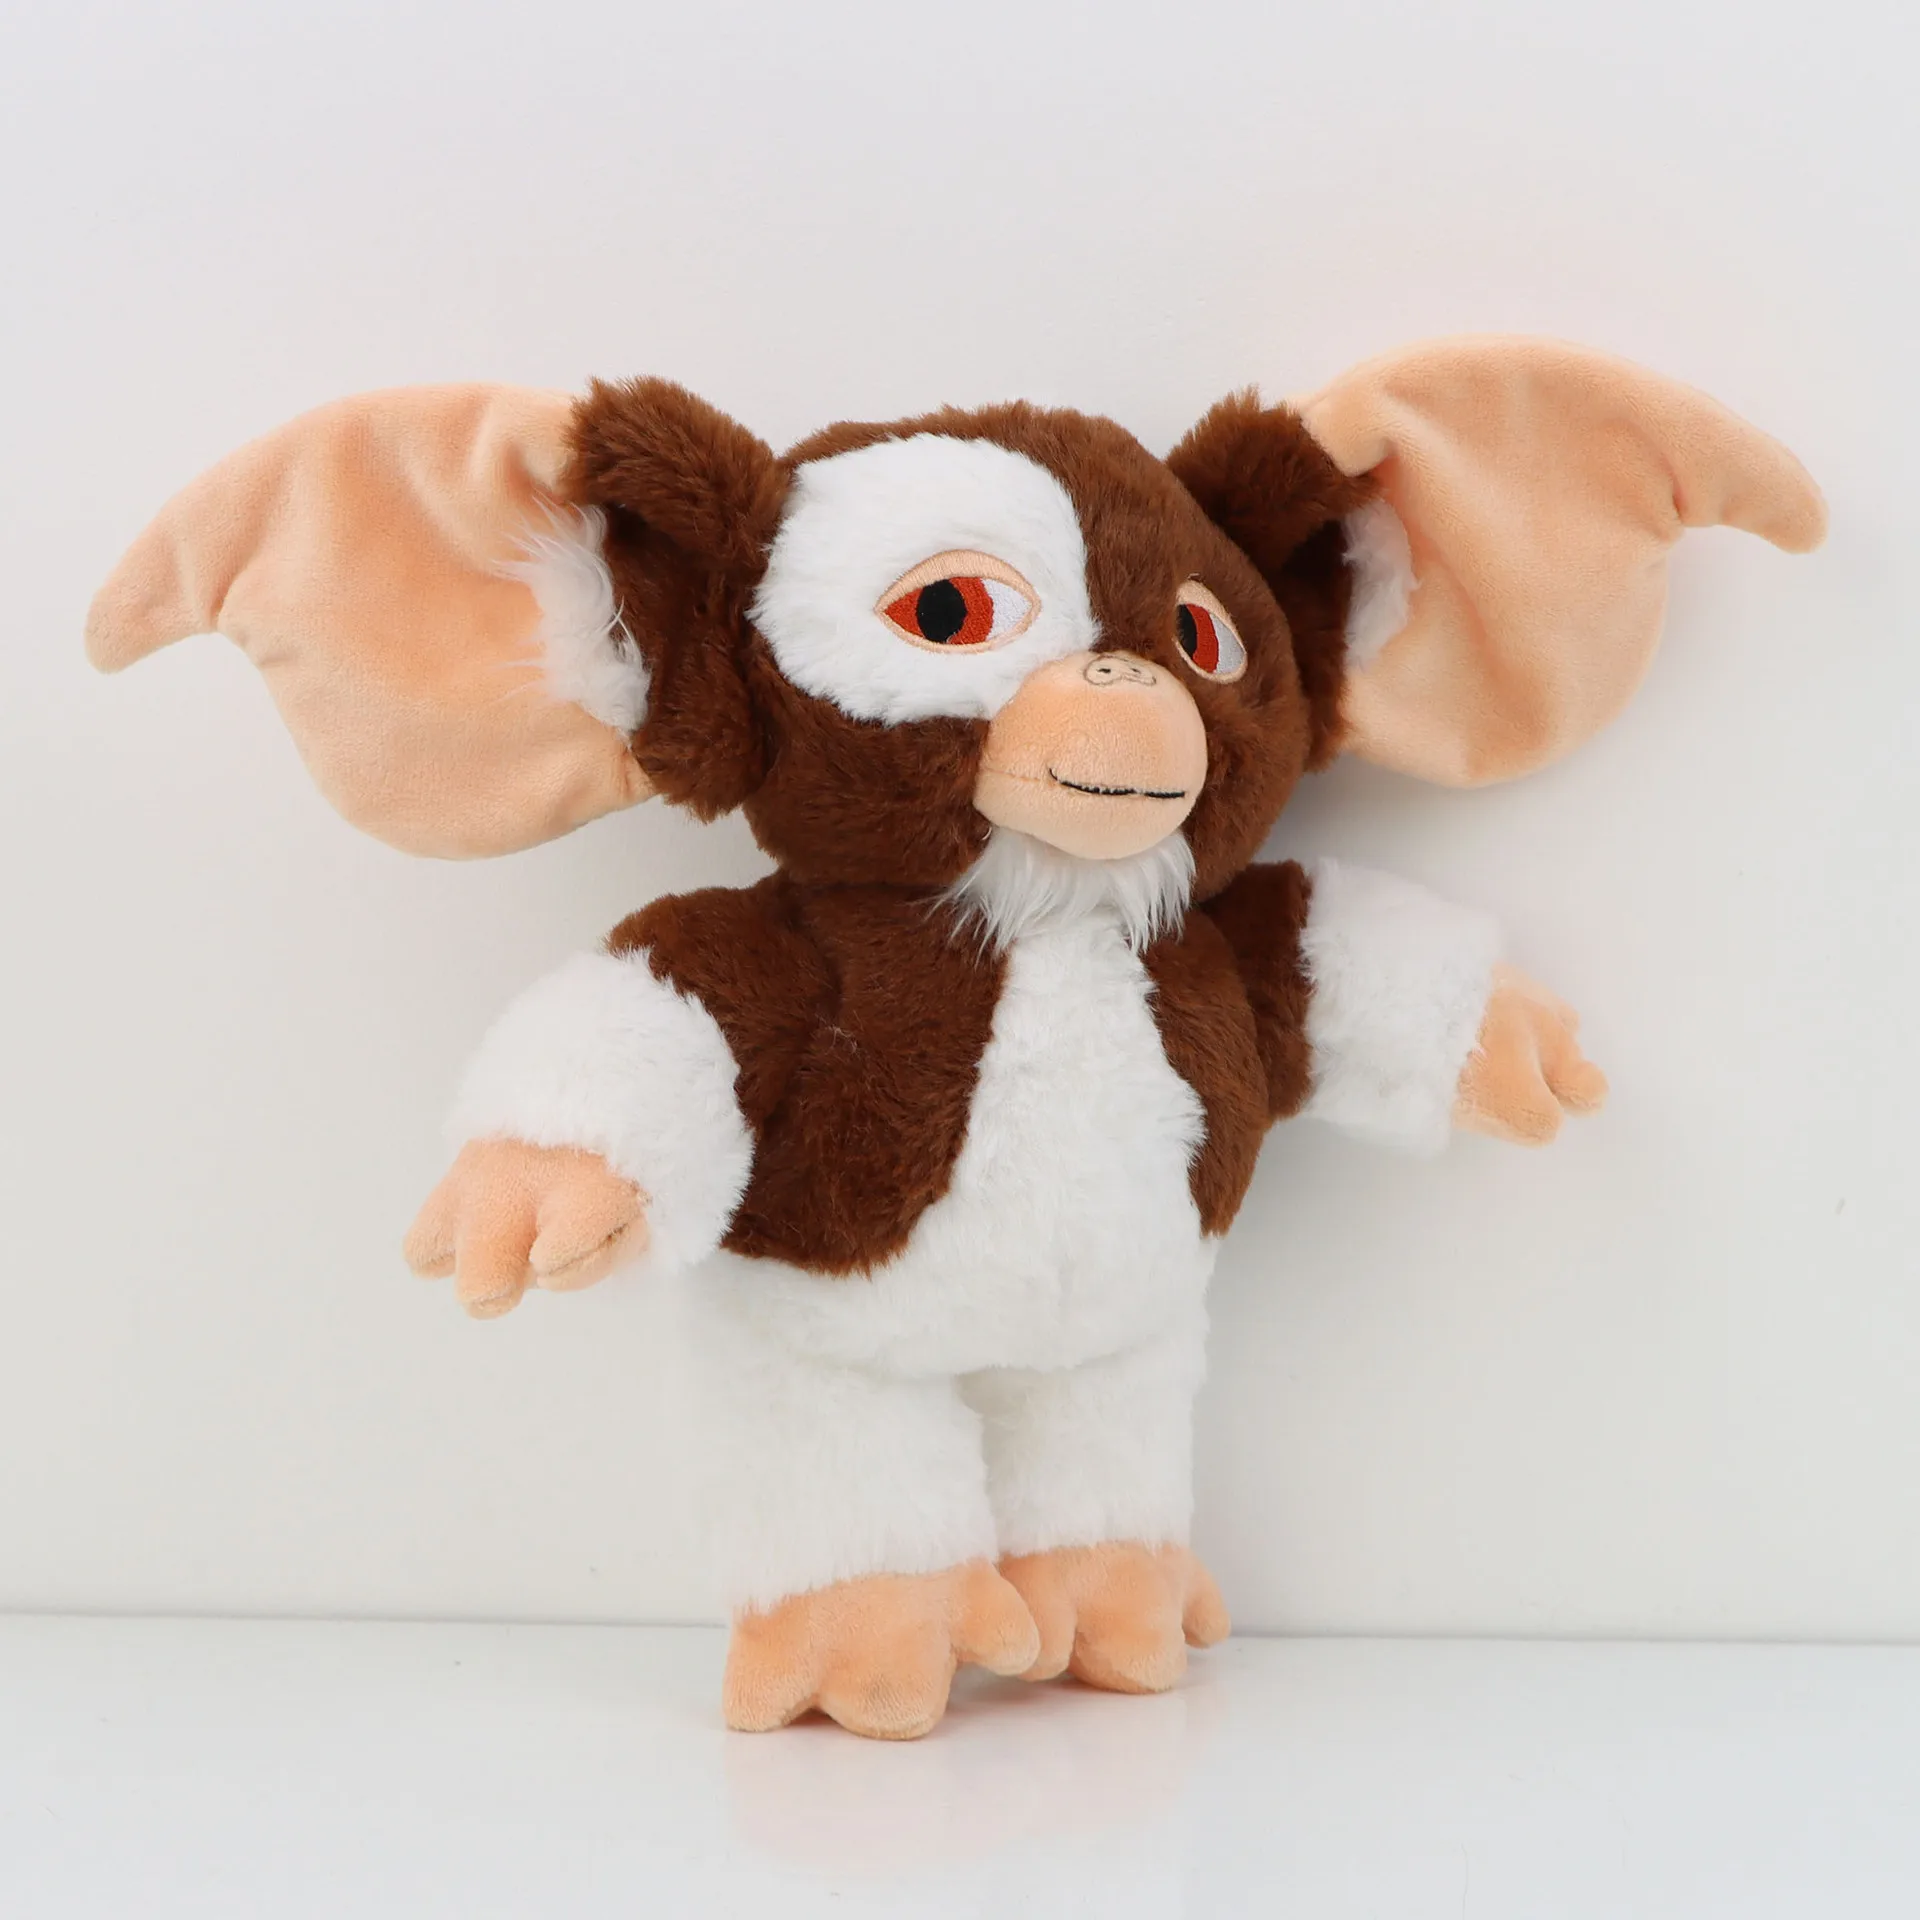 33cm Gremlins Gizmo Plush Toy Soft Fluffy Movie Character Gremlins 3  Stuffed Plushie Doll for Kids Boys Girls Halloween Gifts